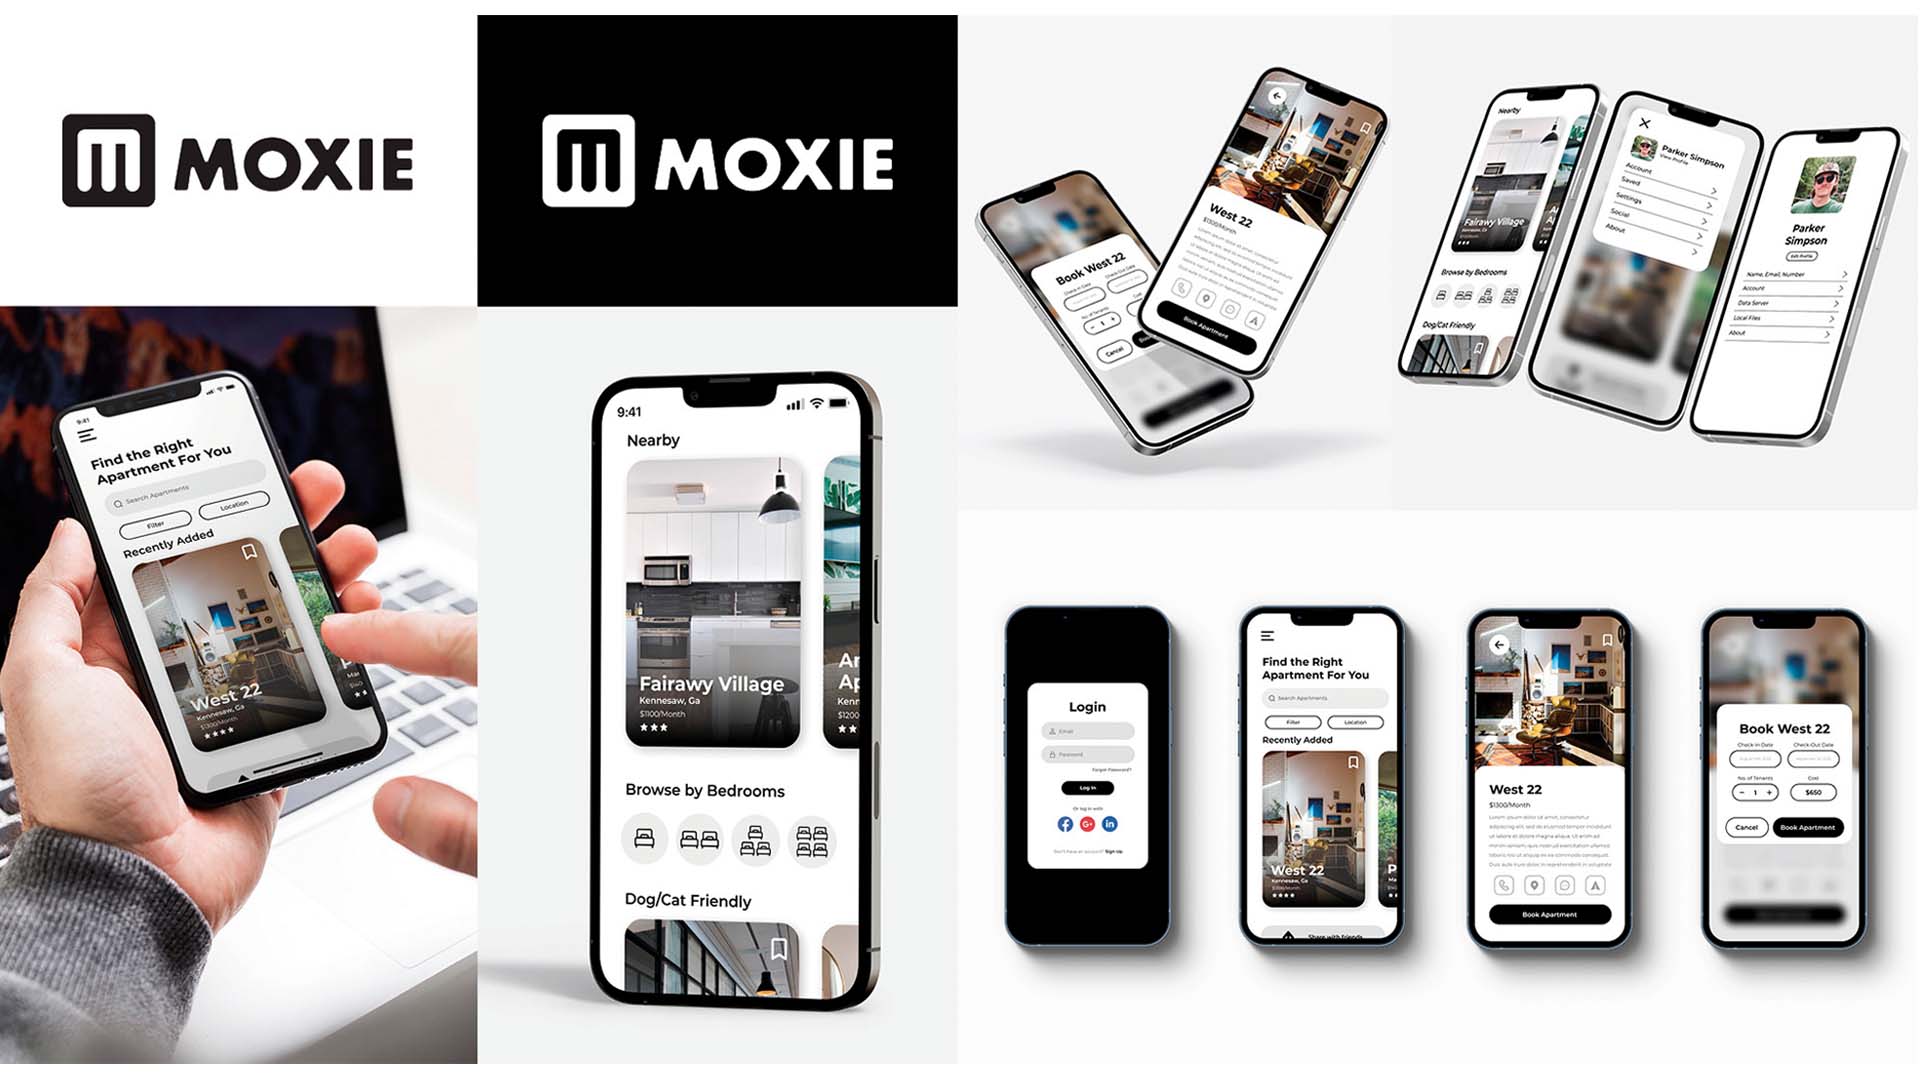  / “Moxie,” UX/UI, 2021. Moxie is a mobile app used to help people find the right apartment for their needs. 